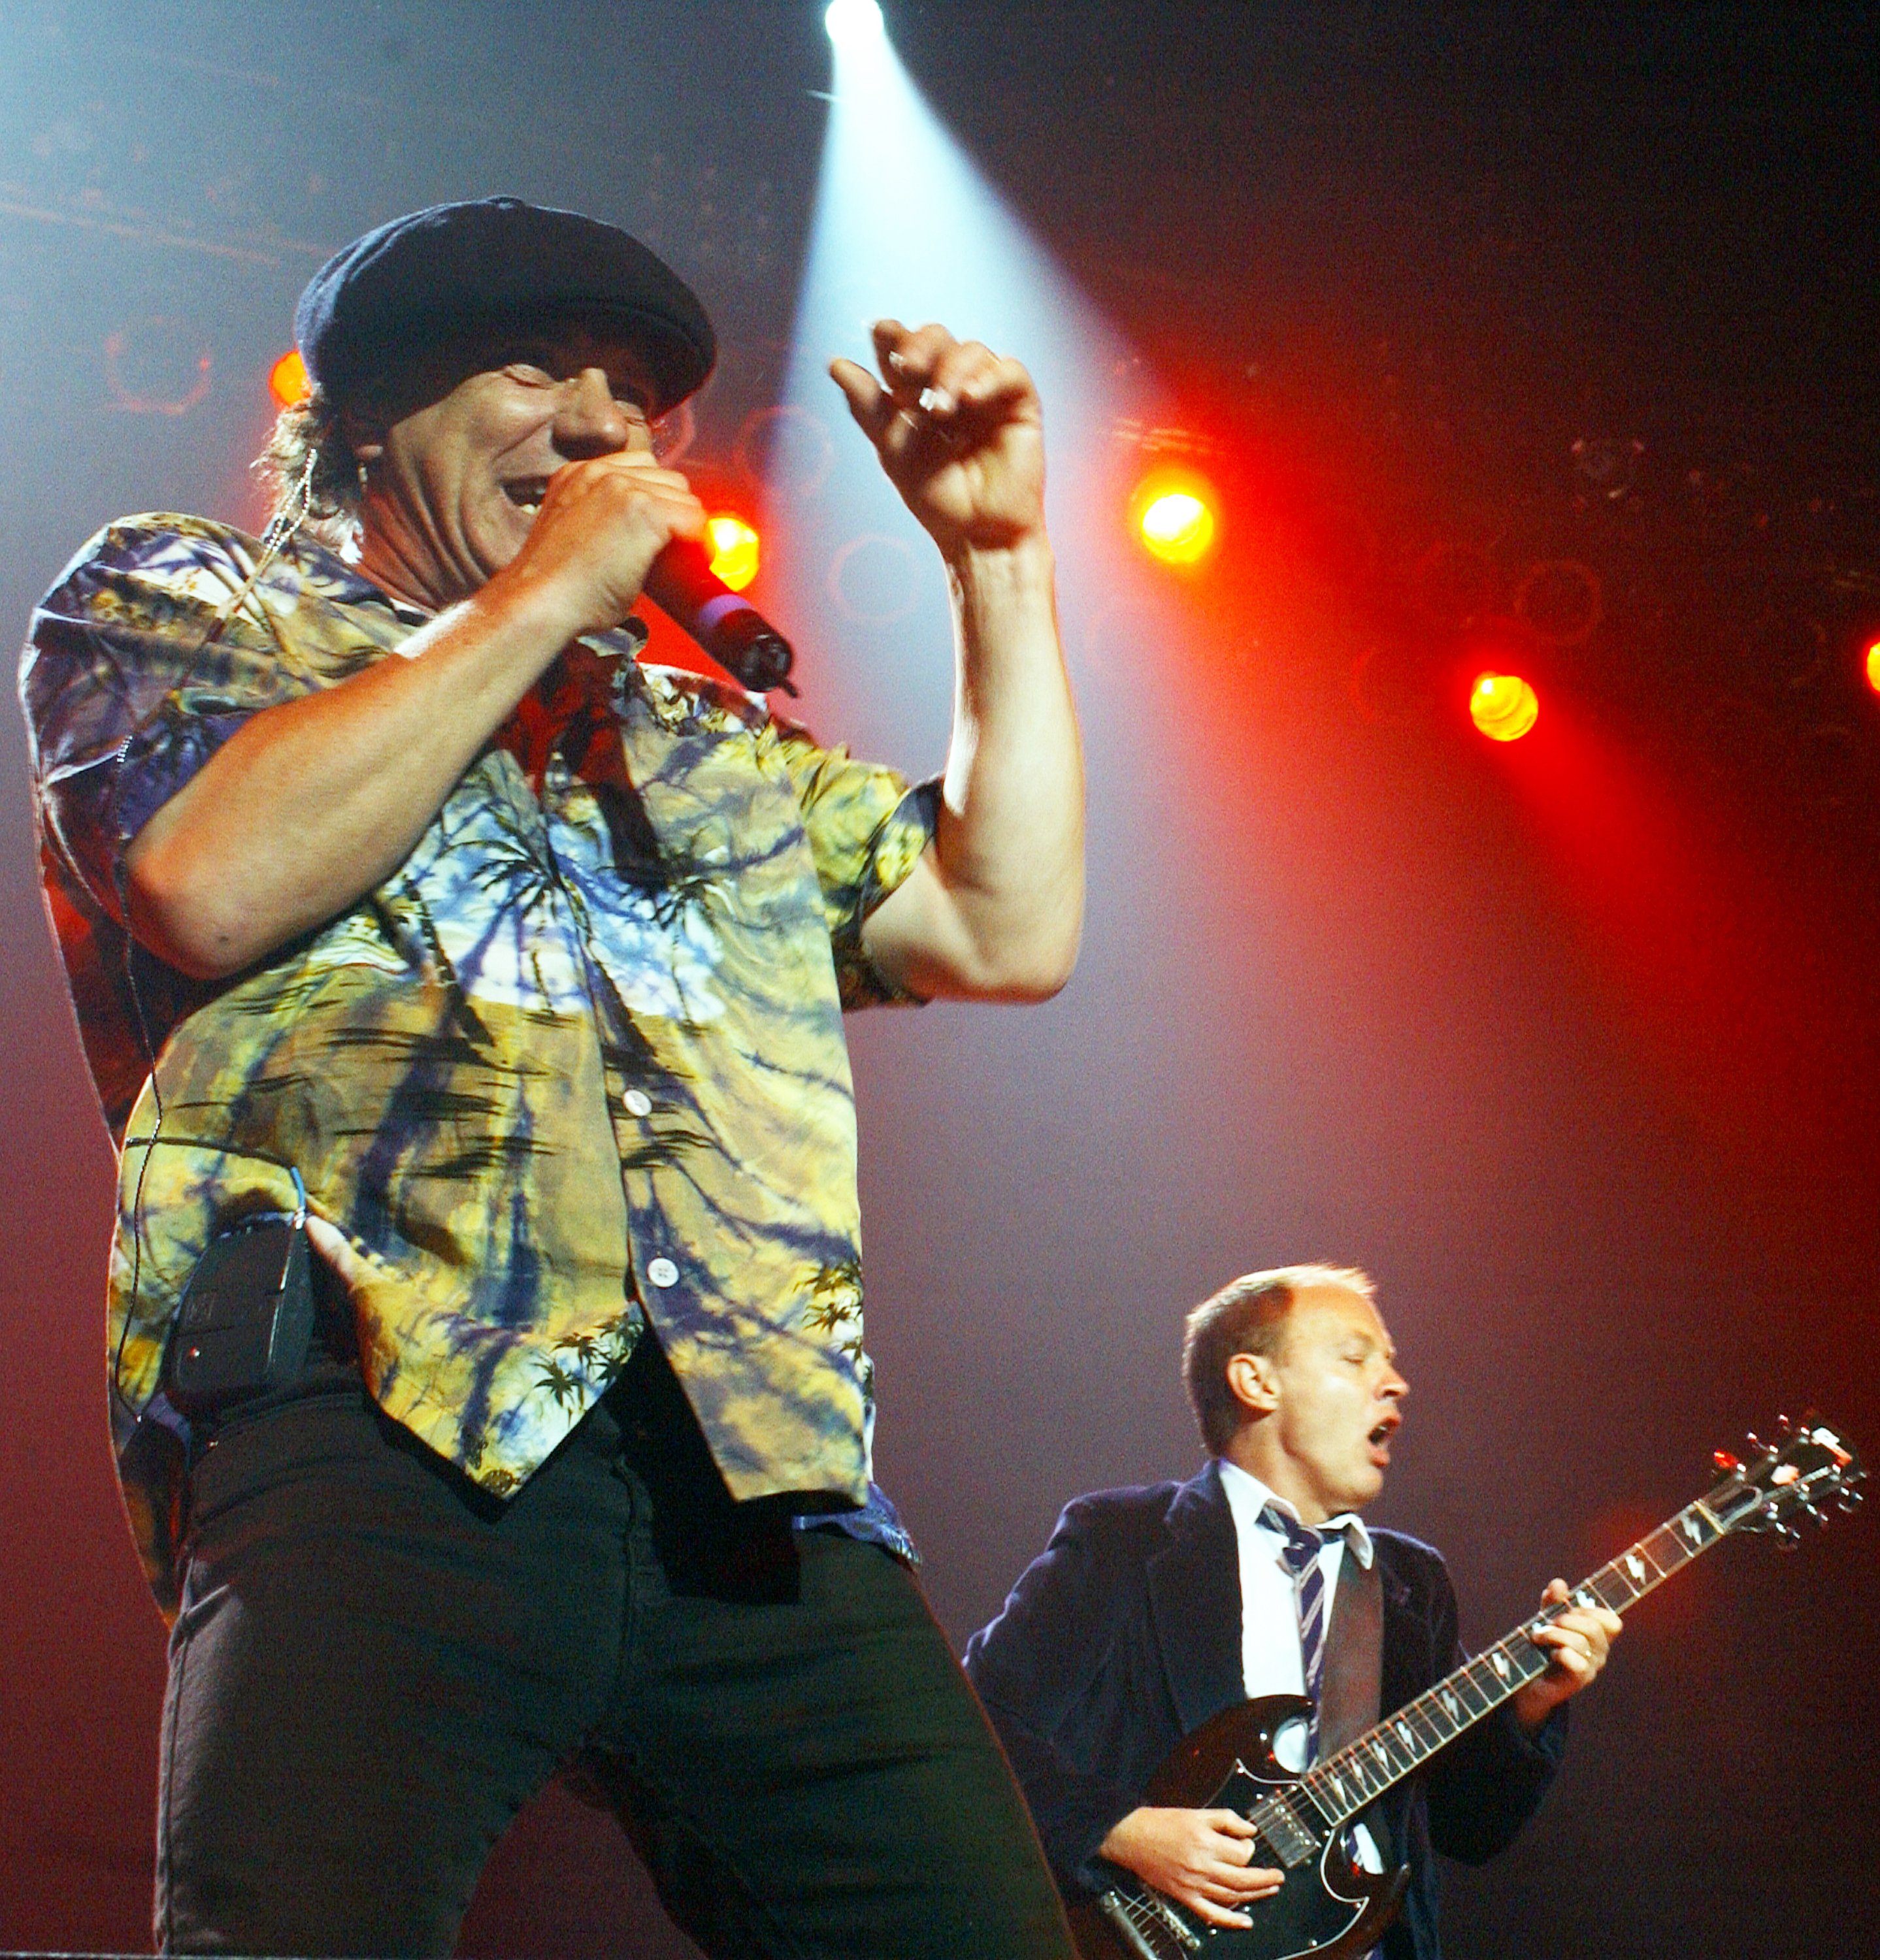 on Twitter: "OTD 2003: Following their “Rock &amp; Roll Hall of Fame” induction, AC/DC a free concert at the Roseland Ballroom in New York in front of 3,200 fans. It's